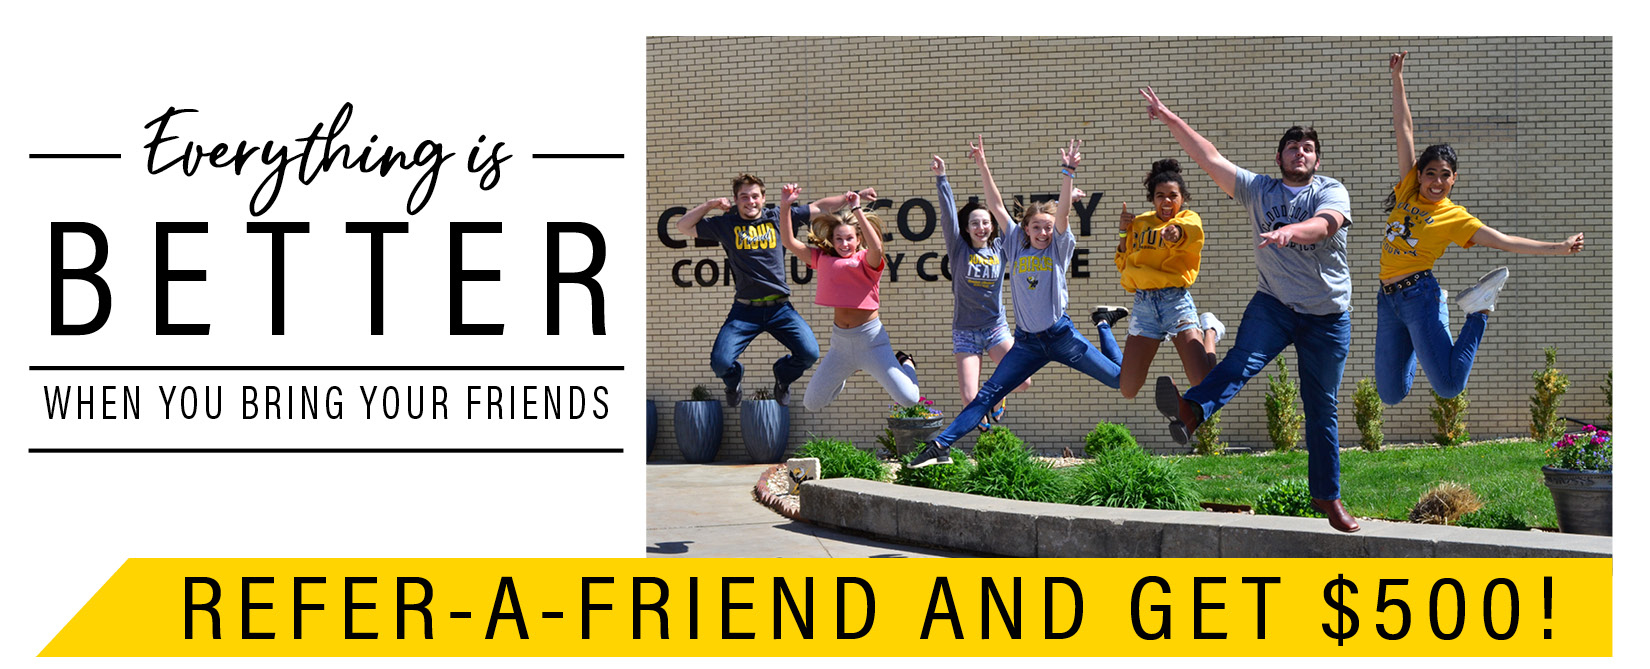 Refer-A-Friend and get $500.